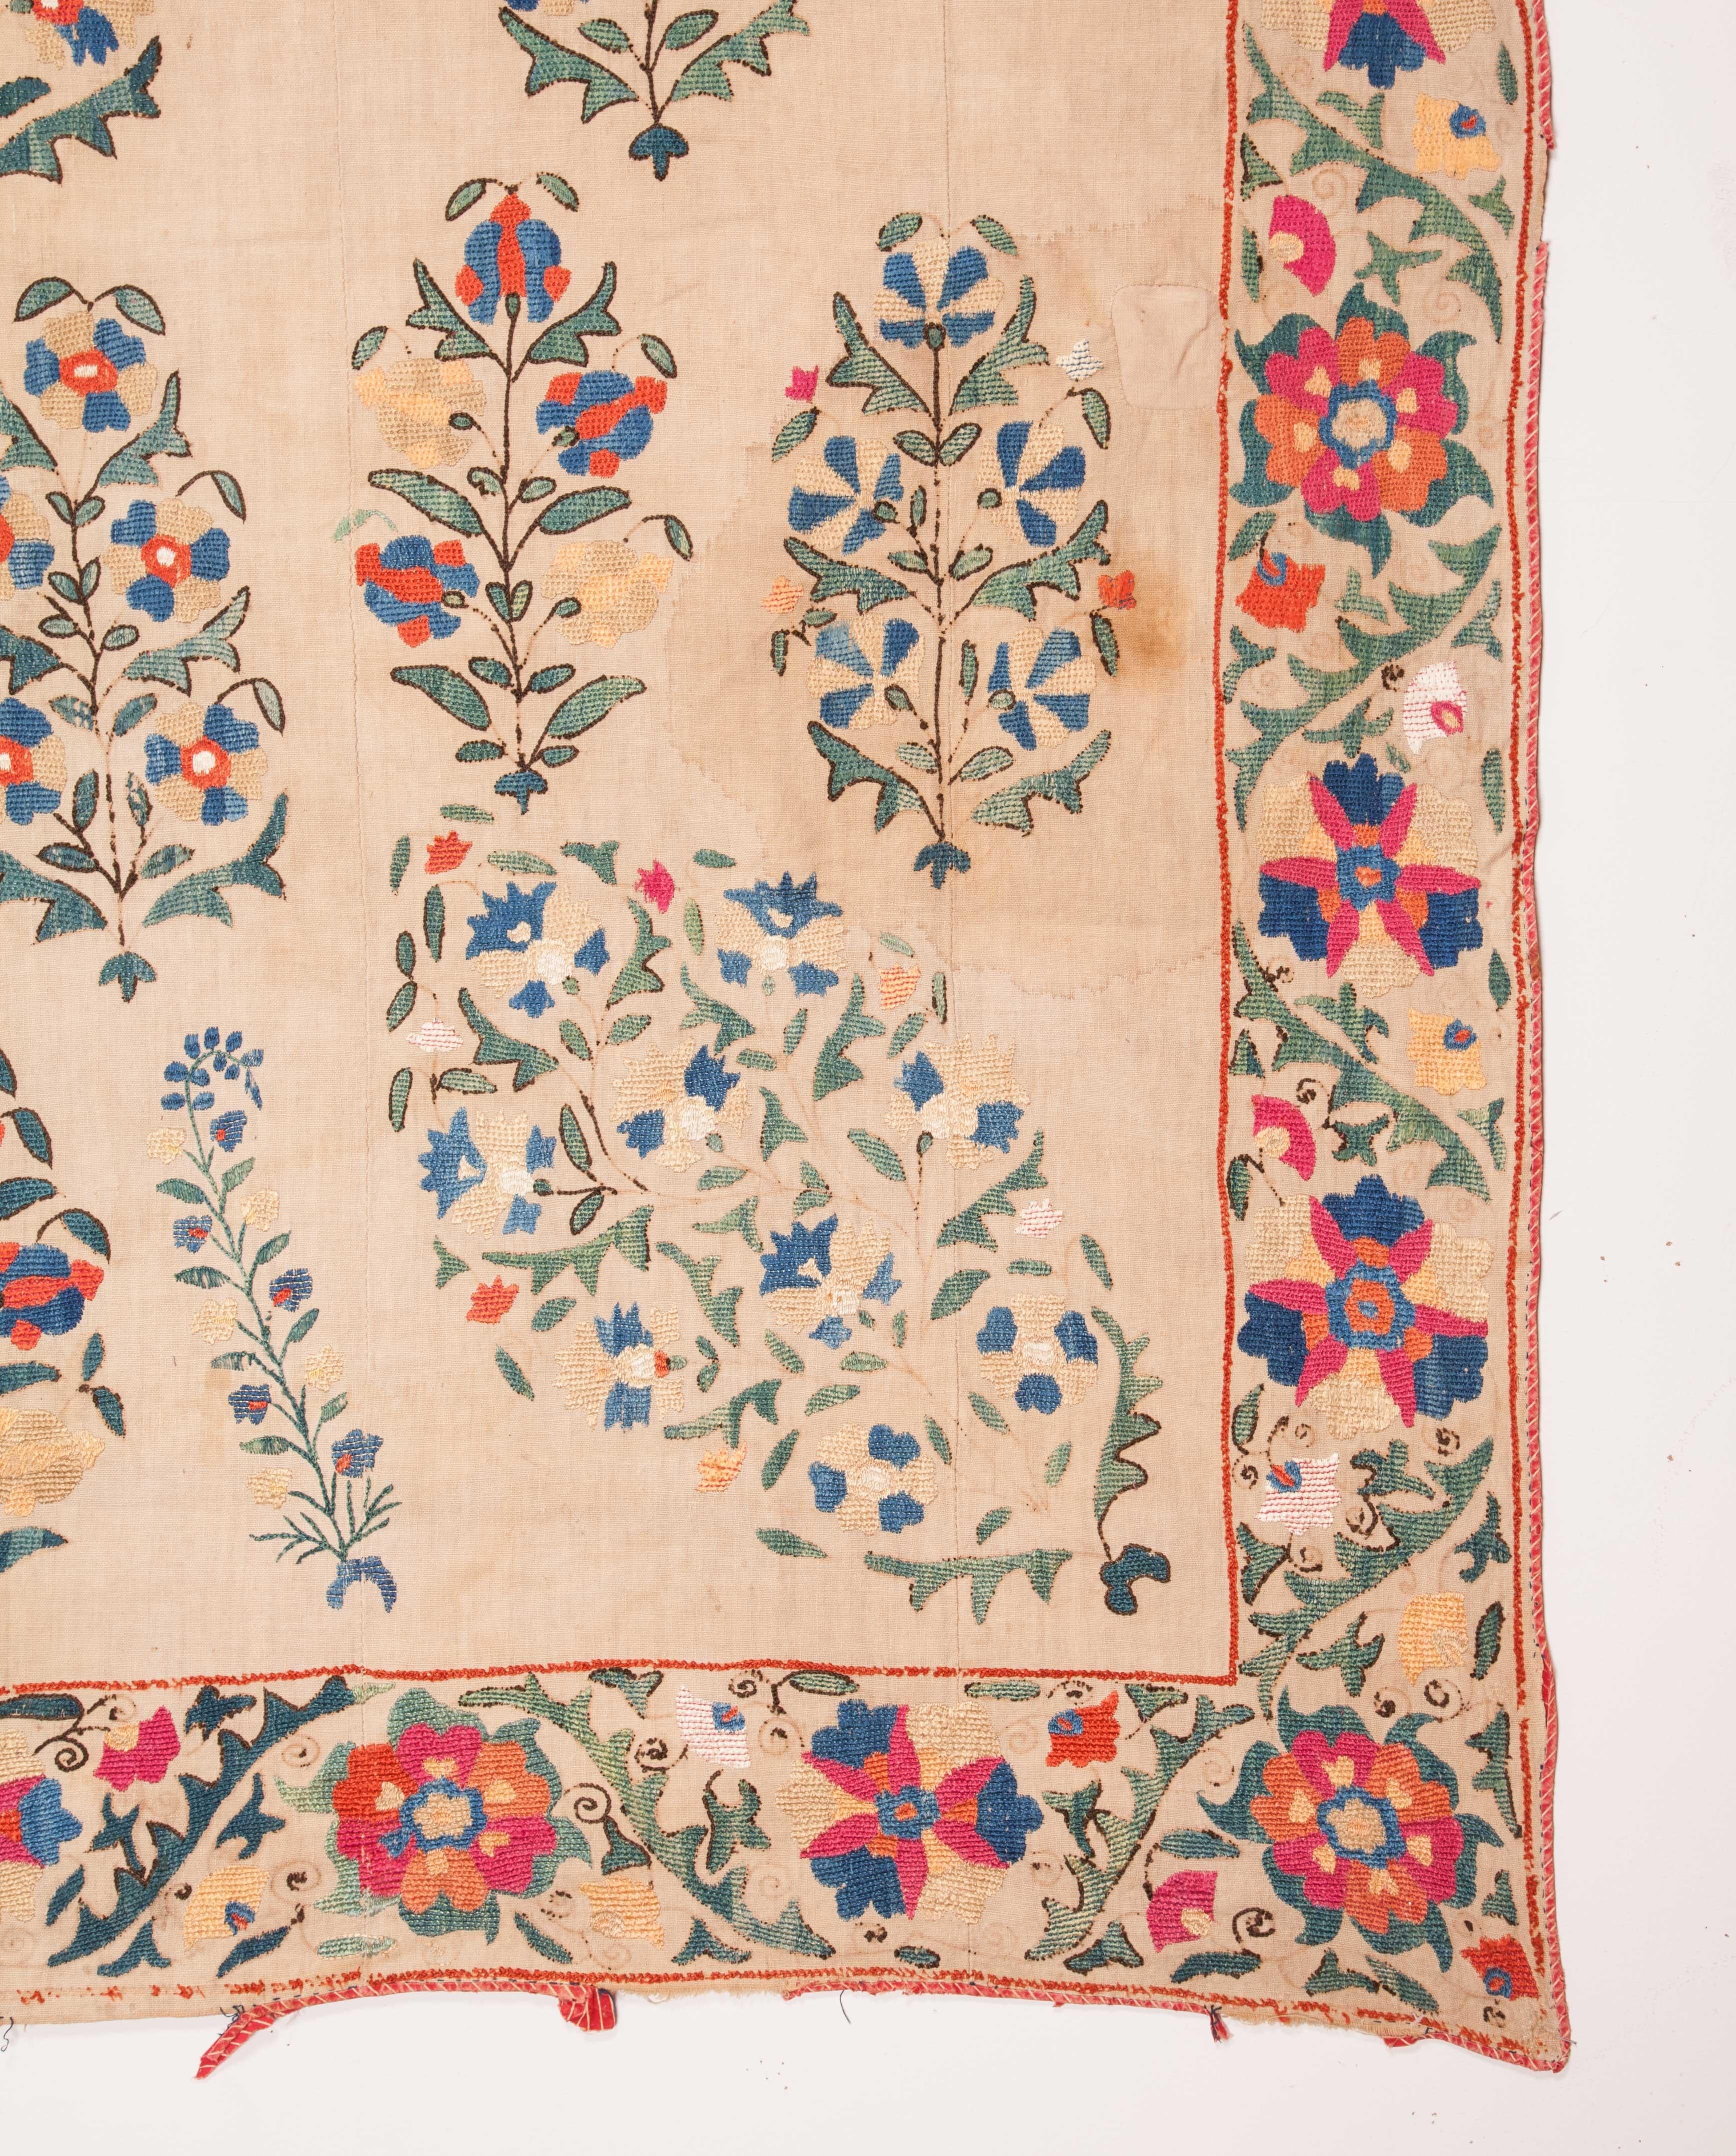 Embroidered Antique Suzani from Uzbekistan Central Asia, 19th Century